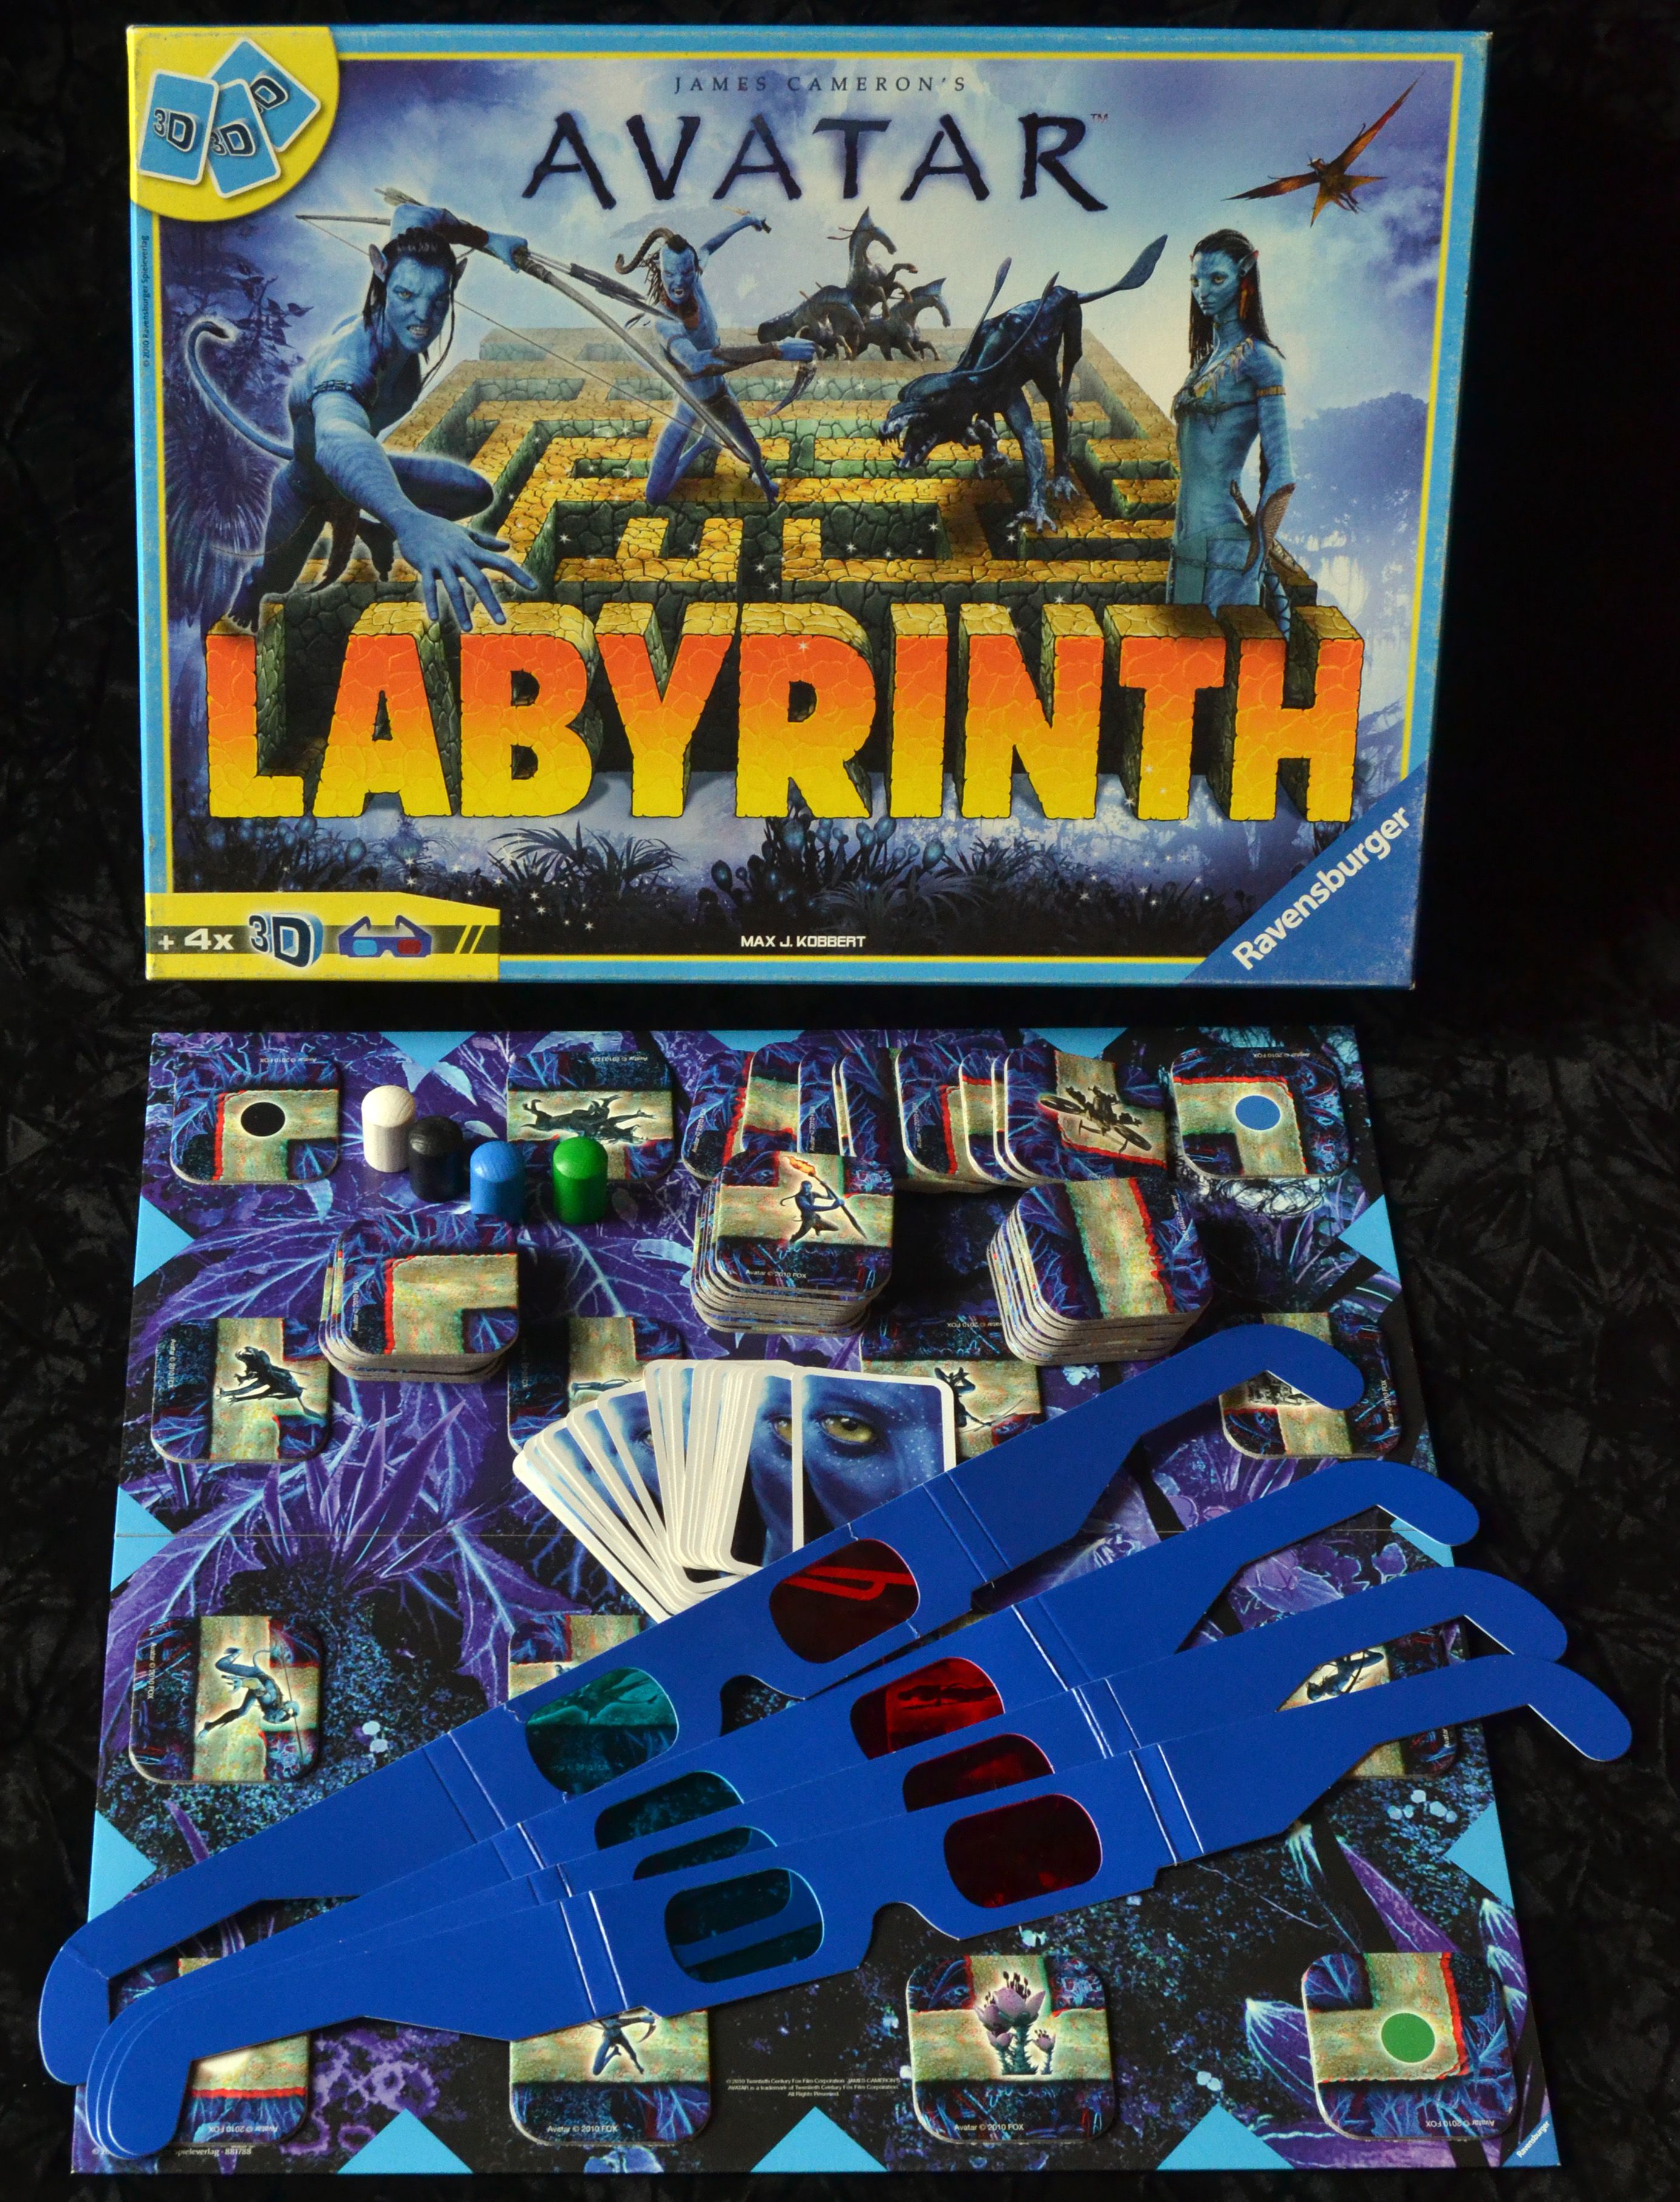 Product Details | Labyrinth | GeekMarket